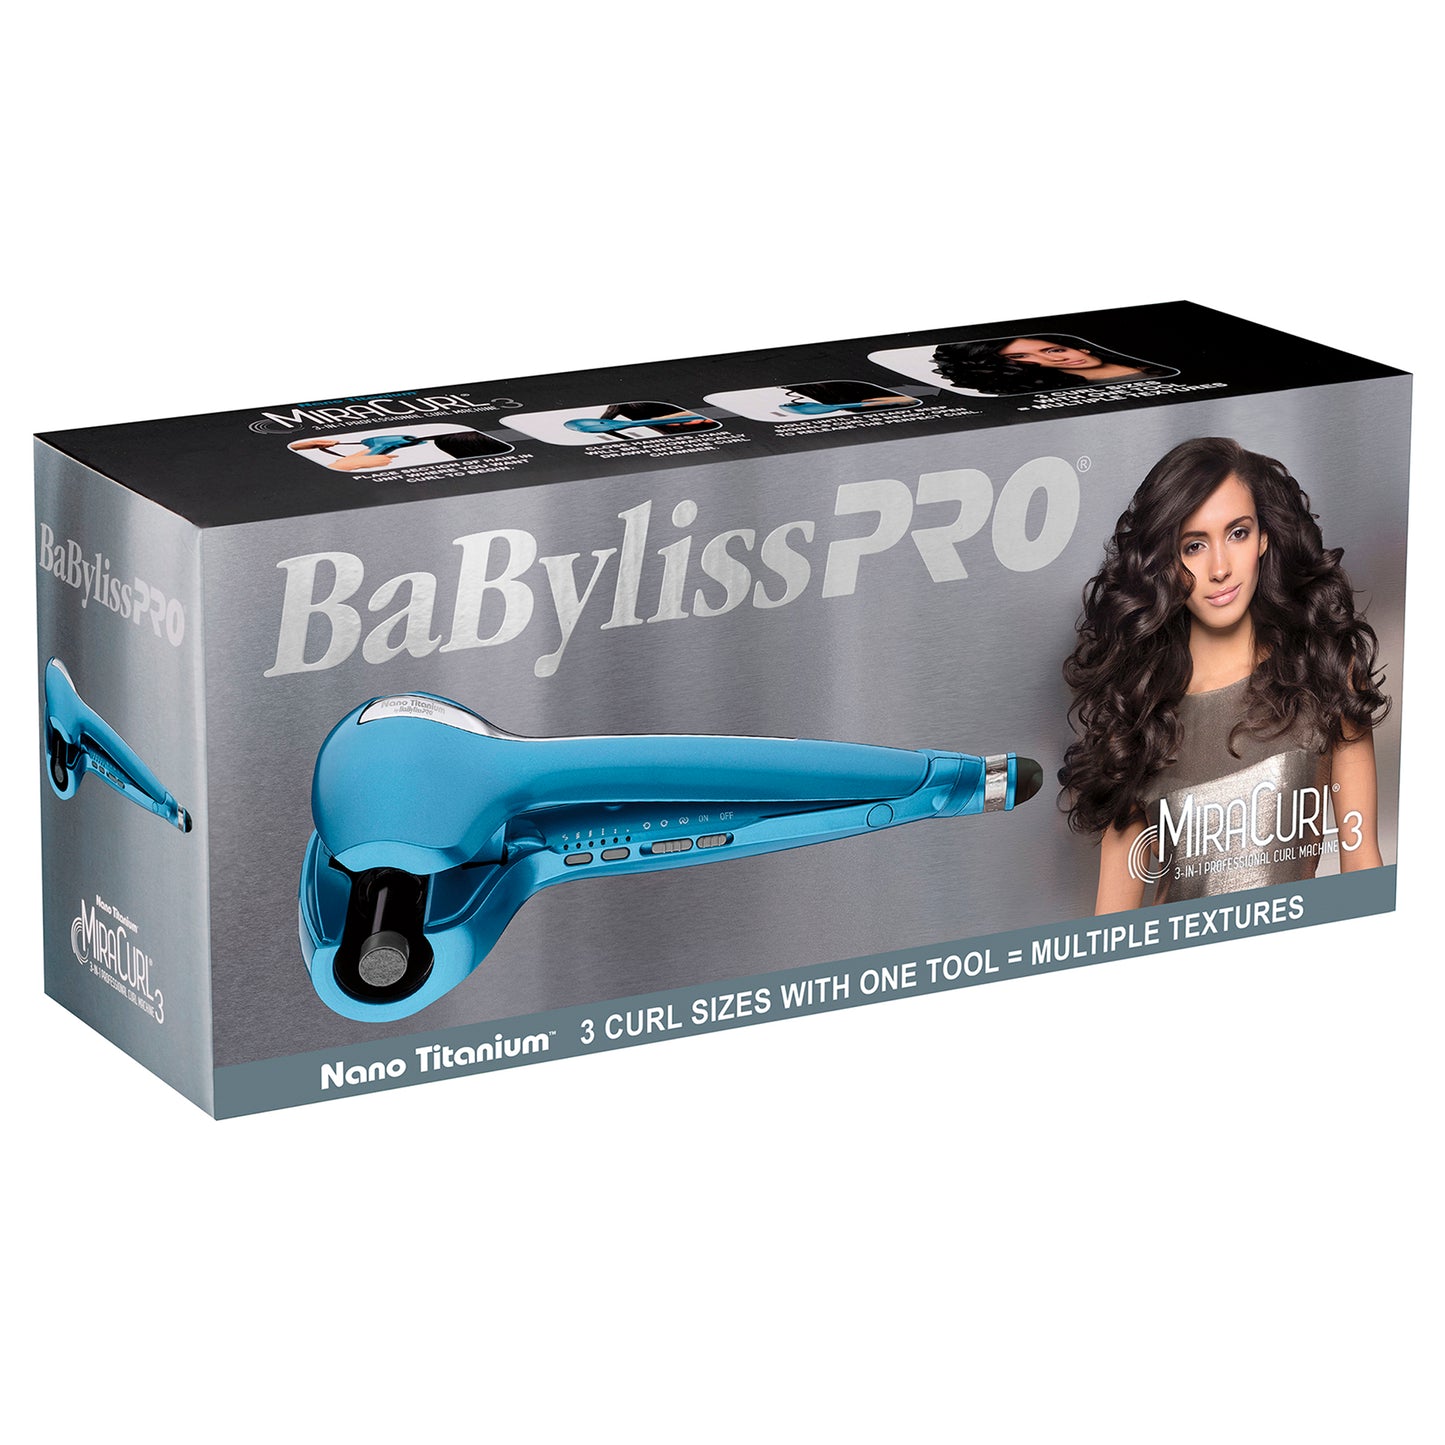 Babyliss Pro Miracurl 3-in-1 Curling iron